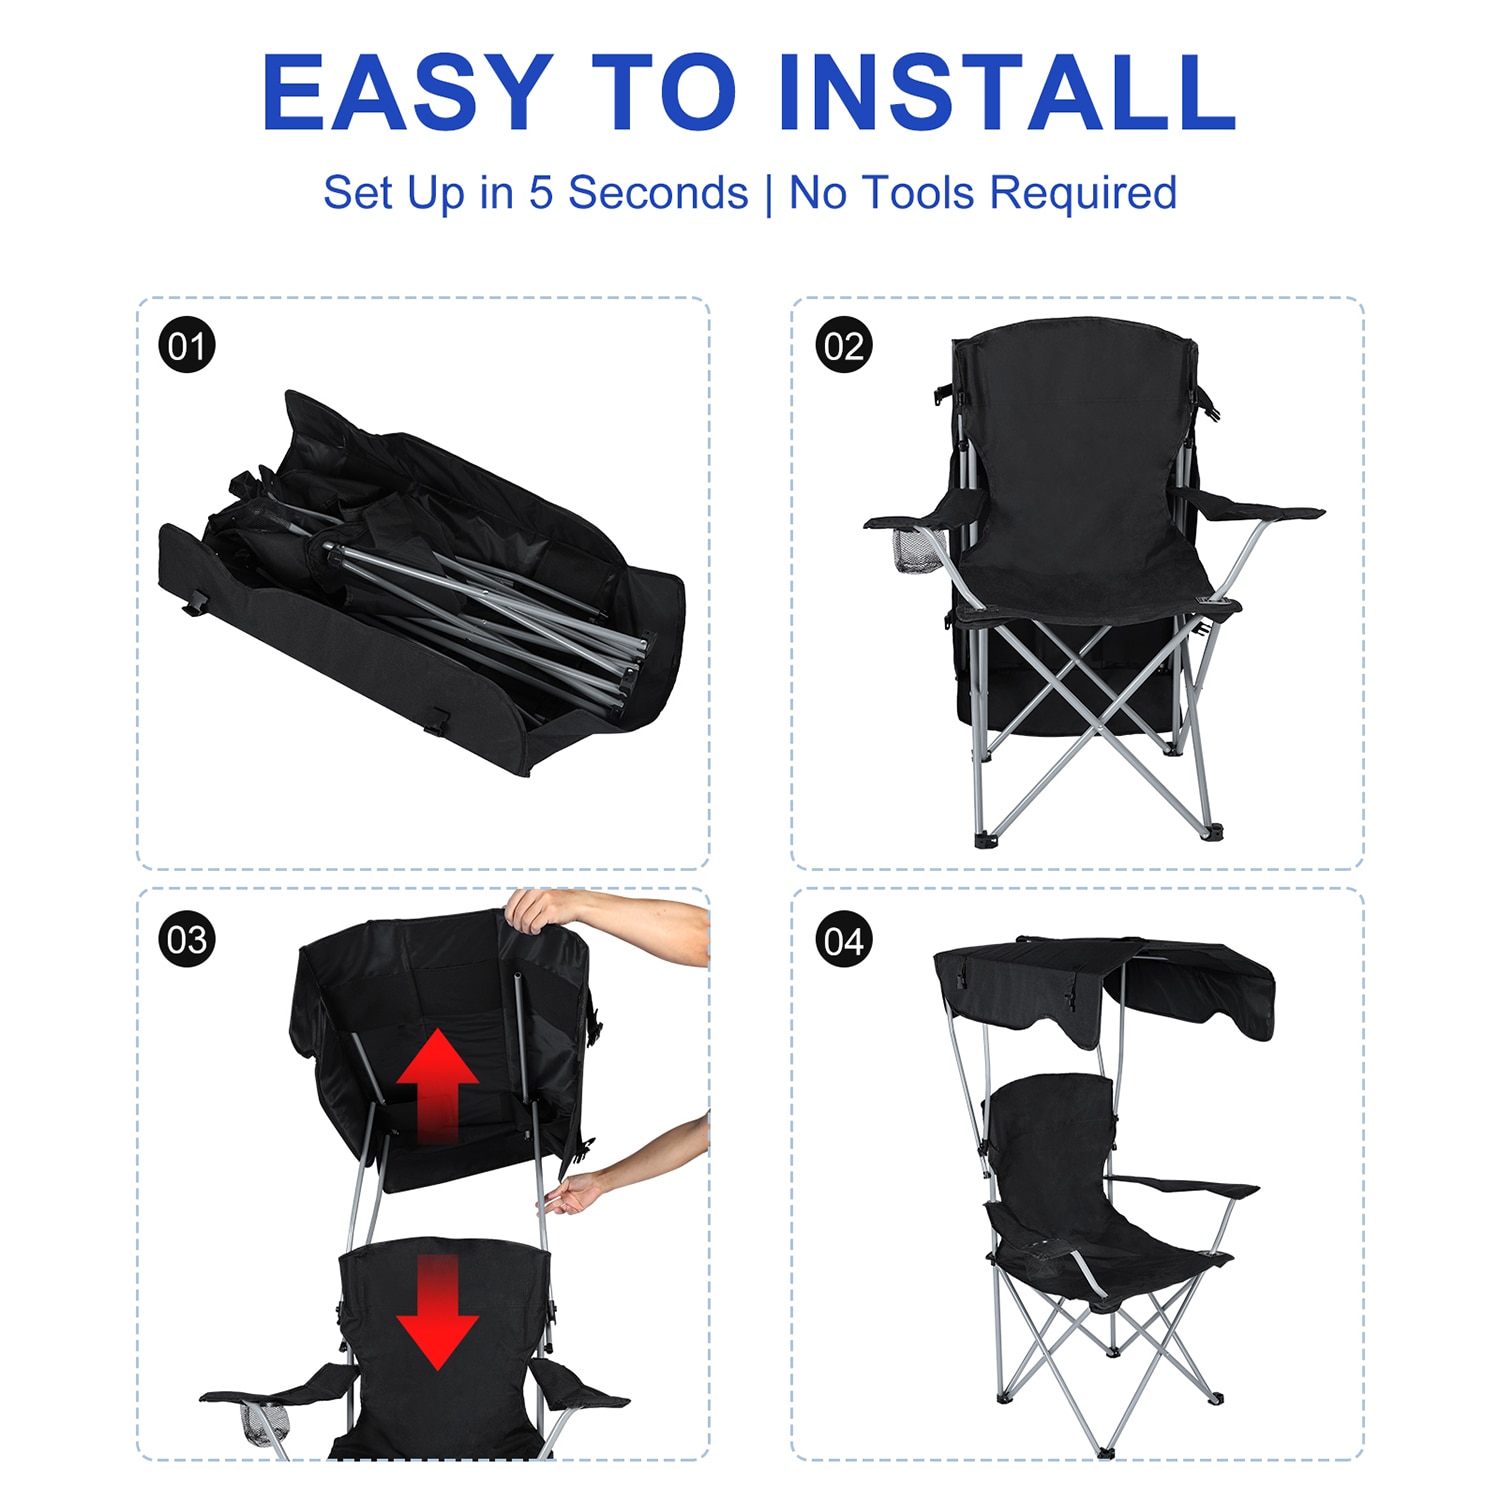 GZMR Black Folding Camping Chair (Carrying Strap/Handle Included) | GZ-DHF6818-BK